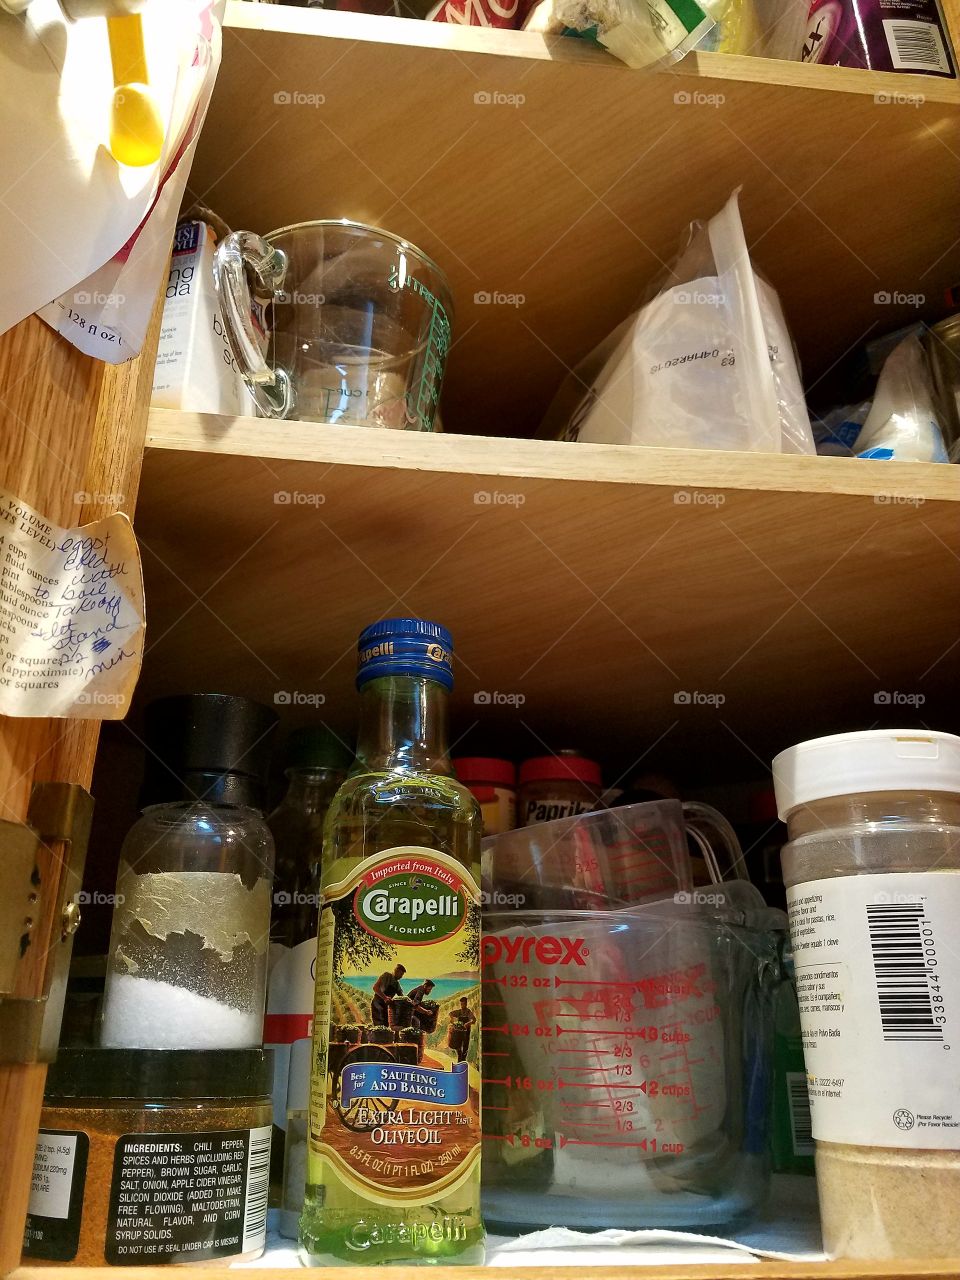 Carapelli Extra Virgin Olive Oil in cooking cabinet.